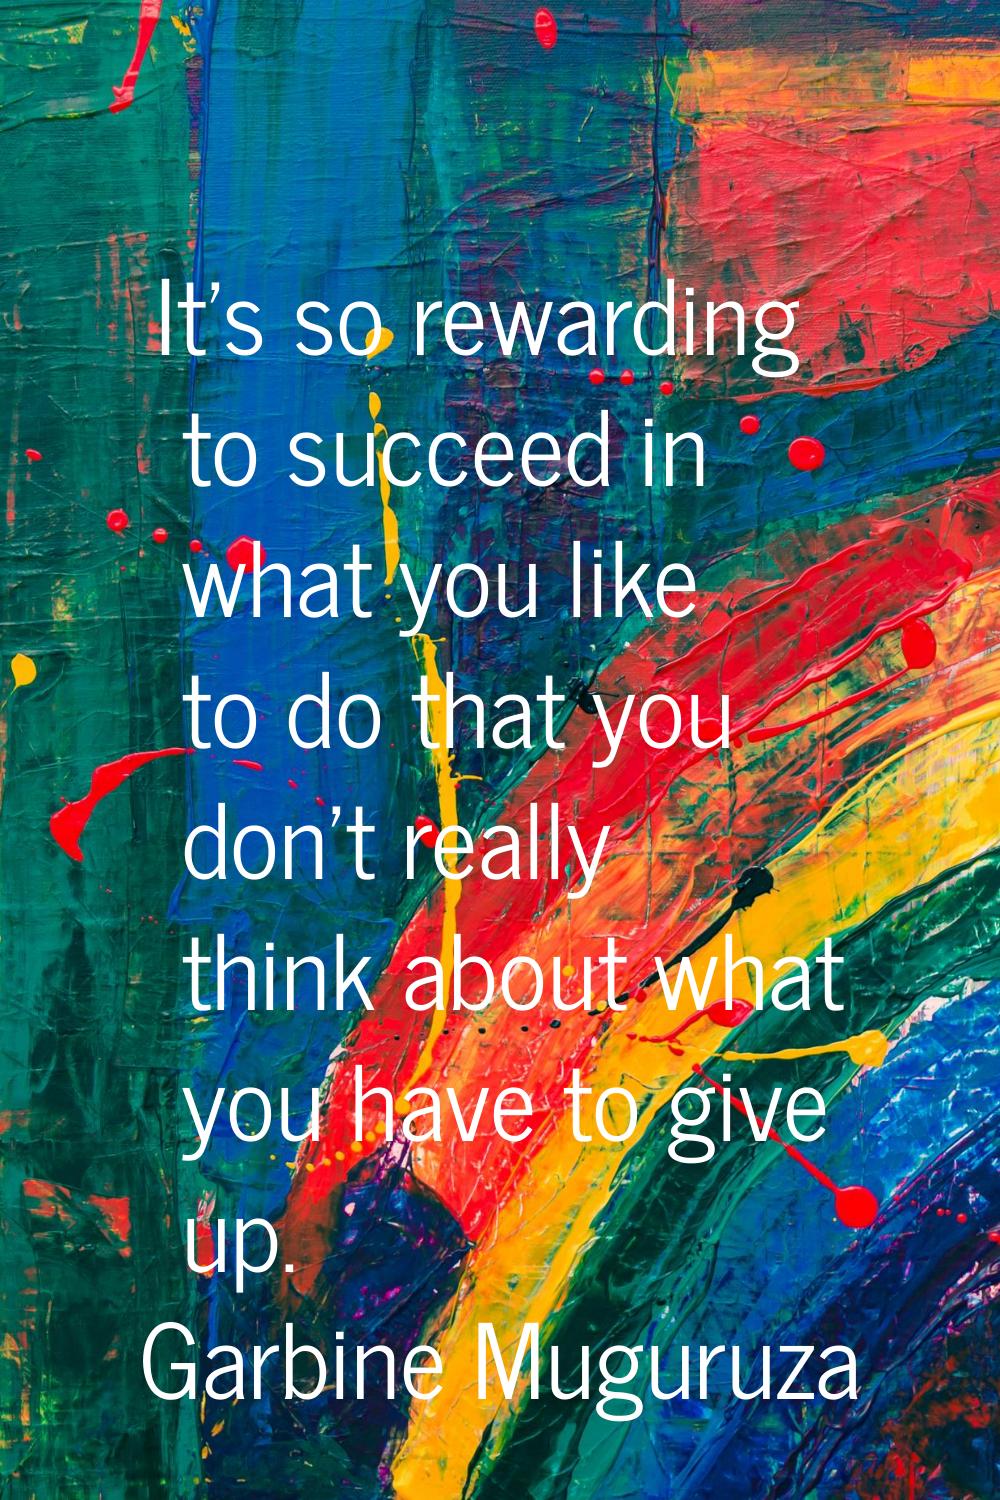 It's so rewarding to succeed in what you like to do that you don't really think about what you have